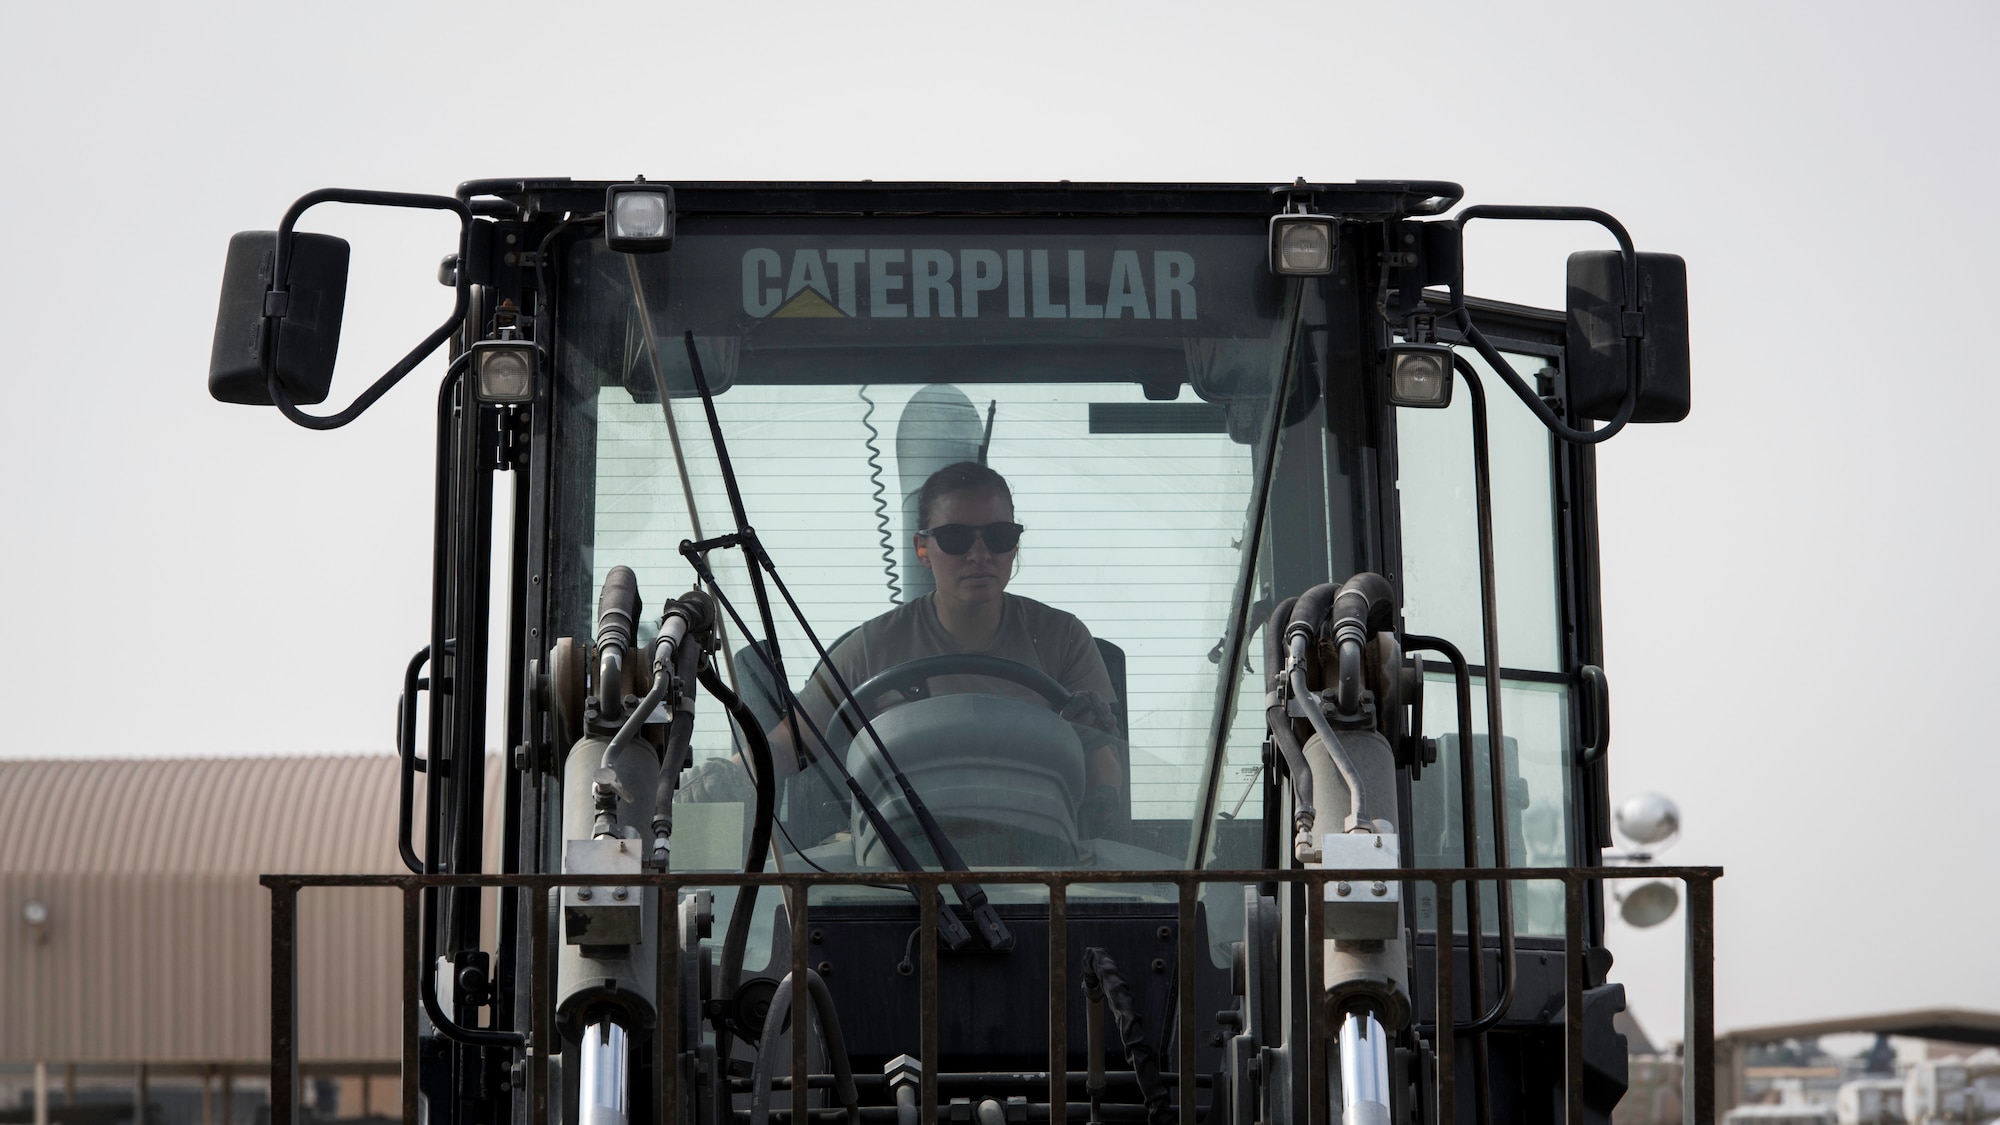 Staff Sgt. Shari Blackburn, 386th Expeditionary Logistics Readiness Squadron aerial port cargo processing representative, operates a forklift at Ali Al Salem Air Base, Kuwait, Oct. 17, 2019. Port Dawgs are responsible for inspecting and building cargo pallets and leading the cargo onto outbound aircraft, which supply various locations within the U.S. Central Command area of responsibility.